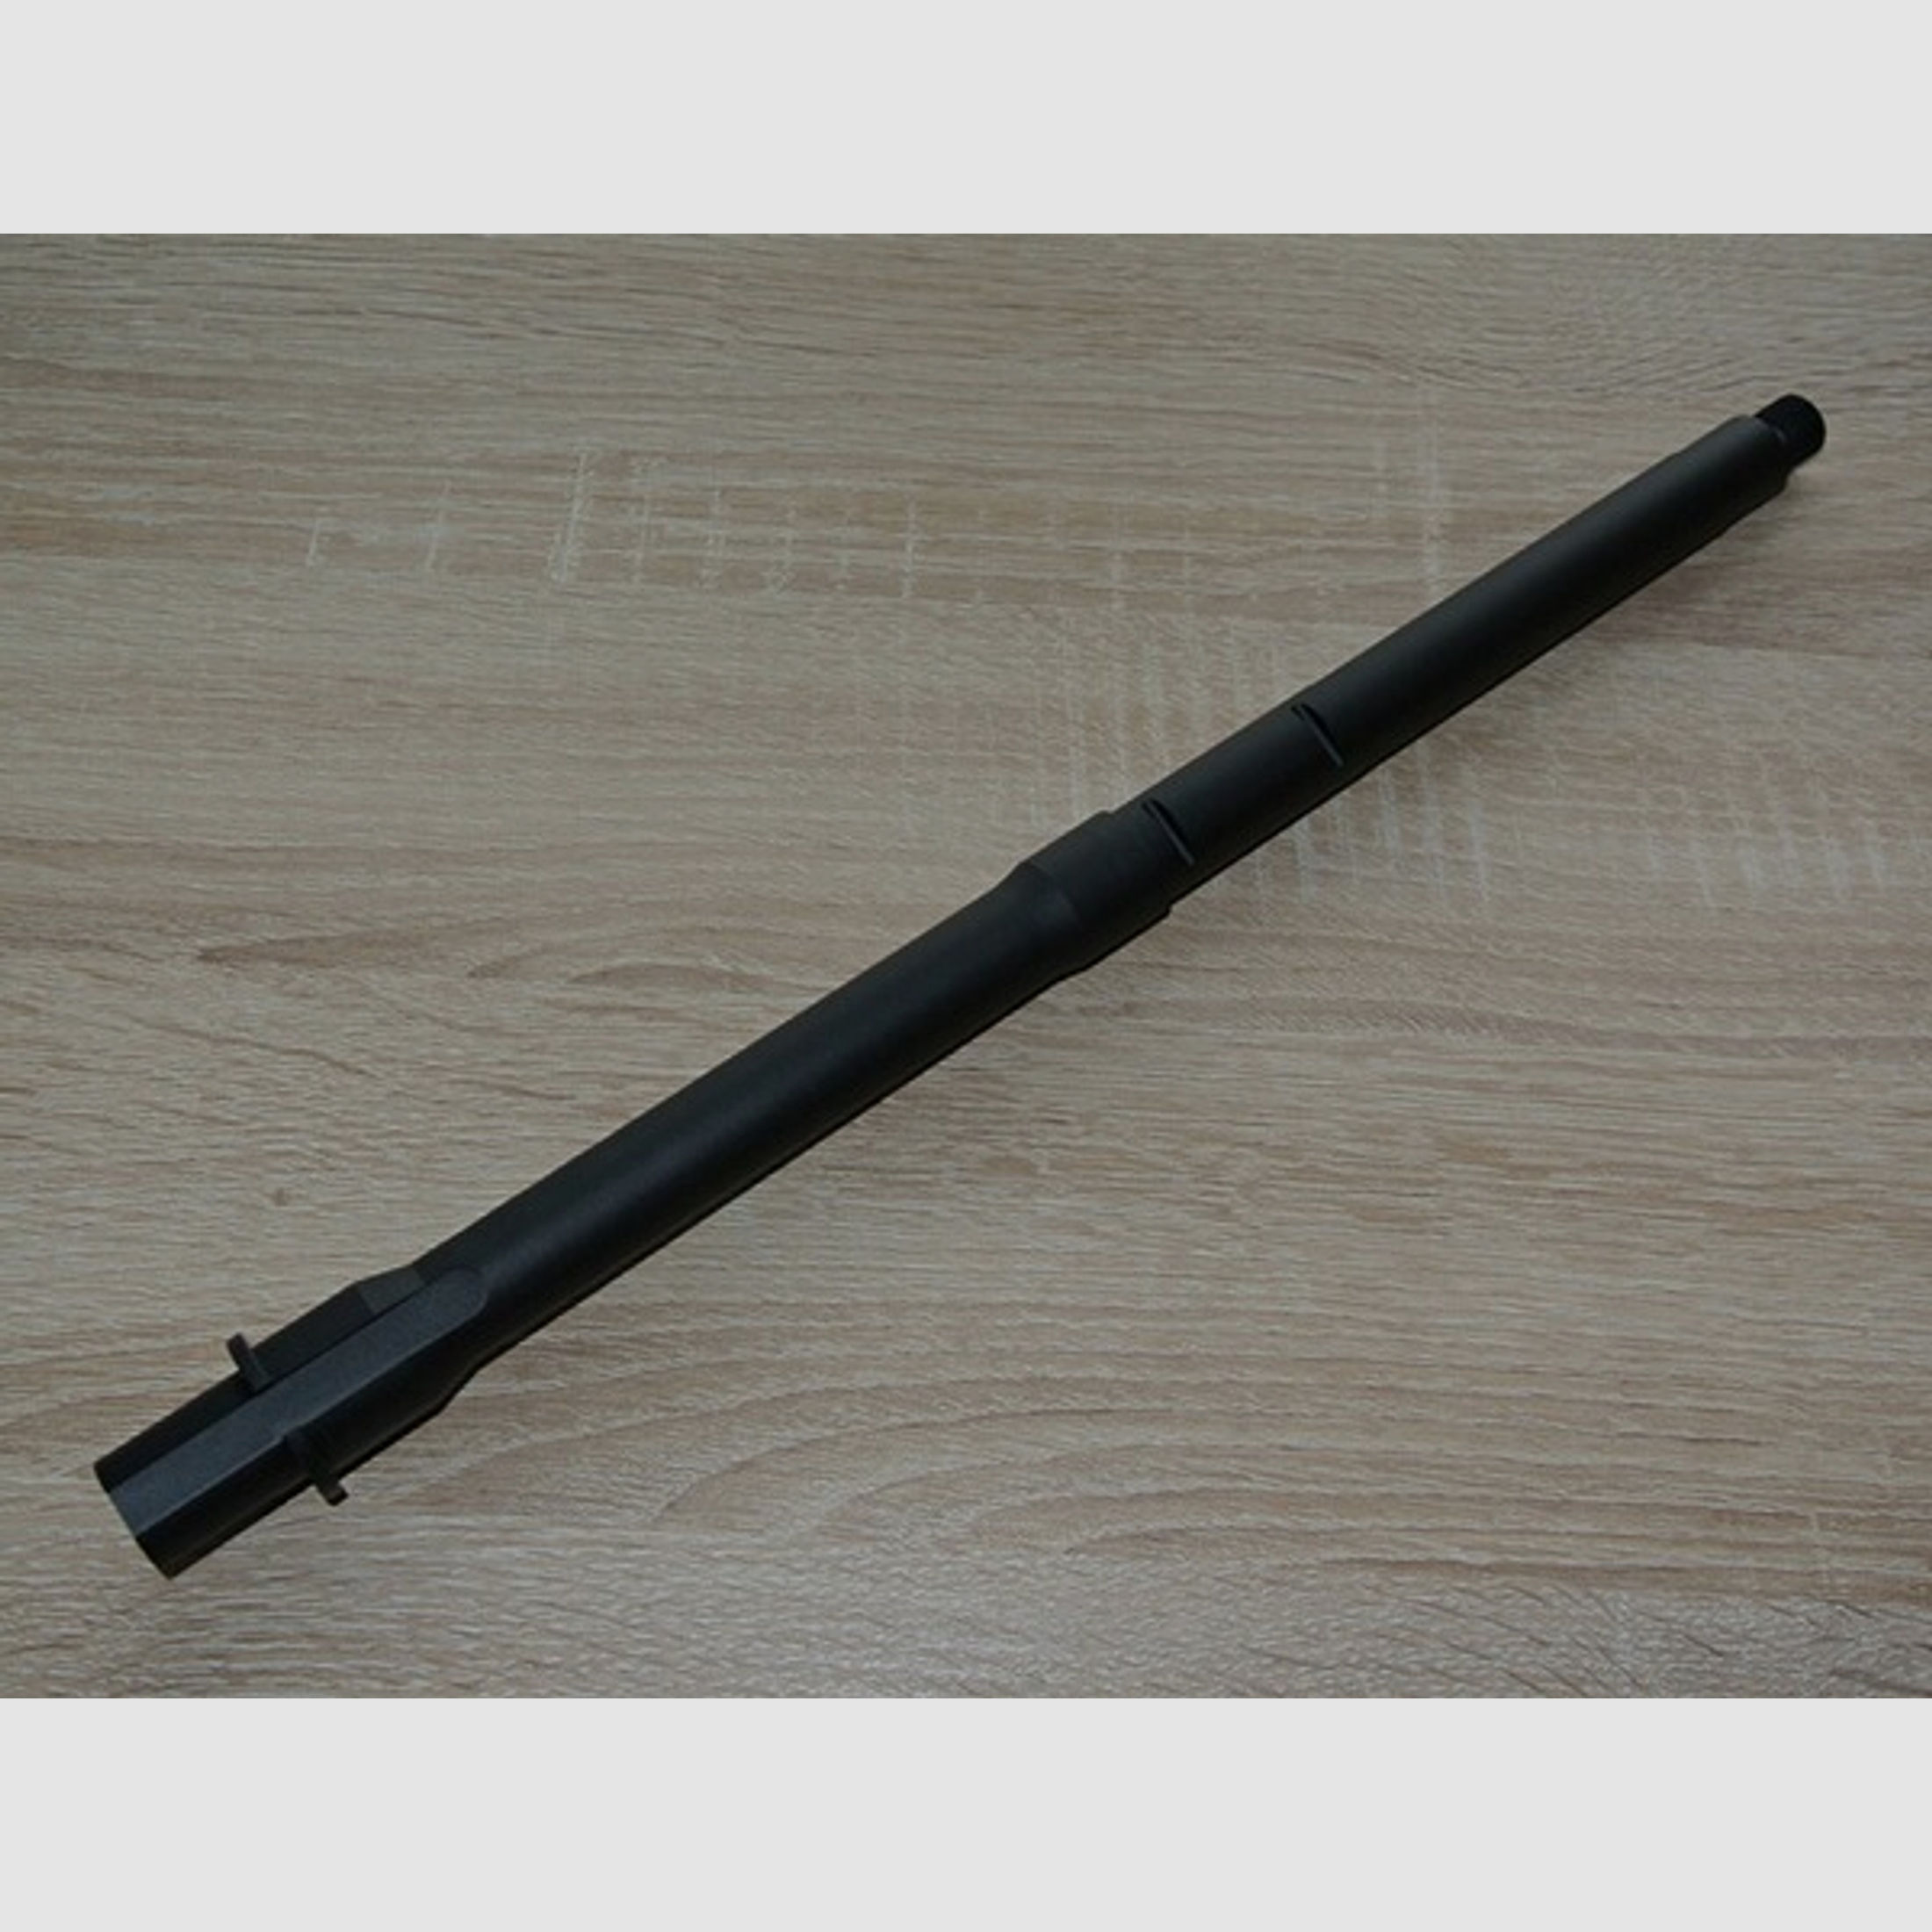 DF-ACC73 14.5 inch M4 One Piece Outer Barrel 14mm-Black M655 style Airsoft